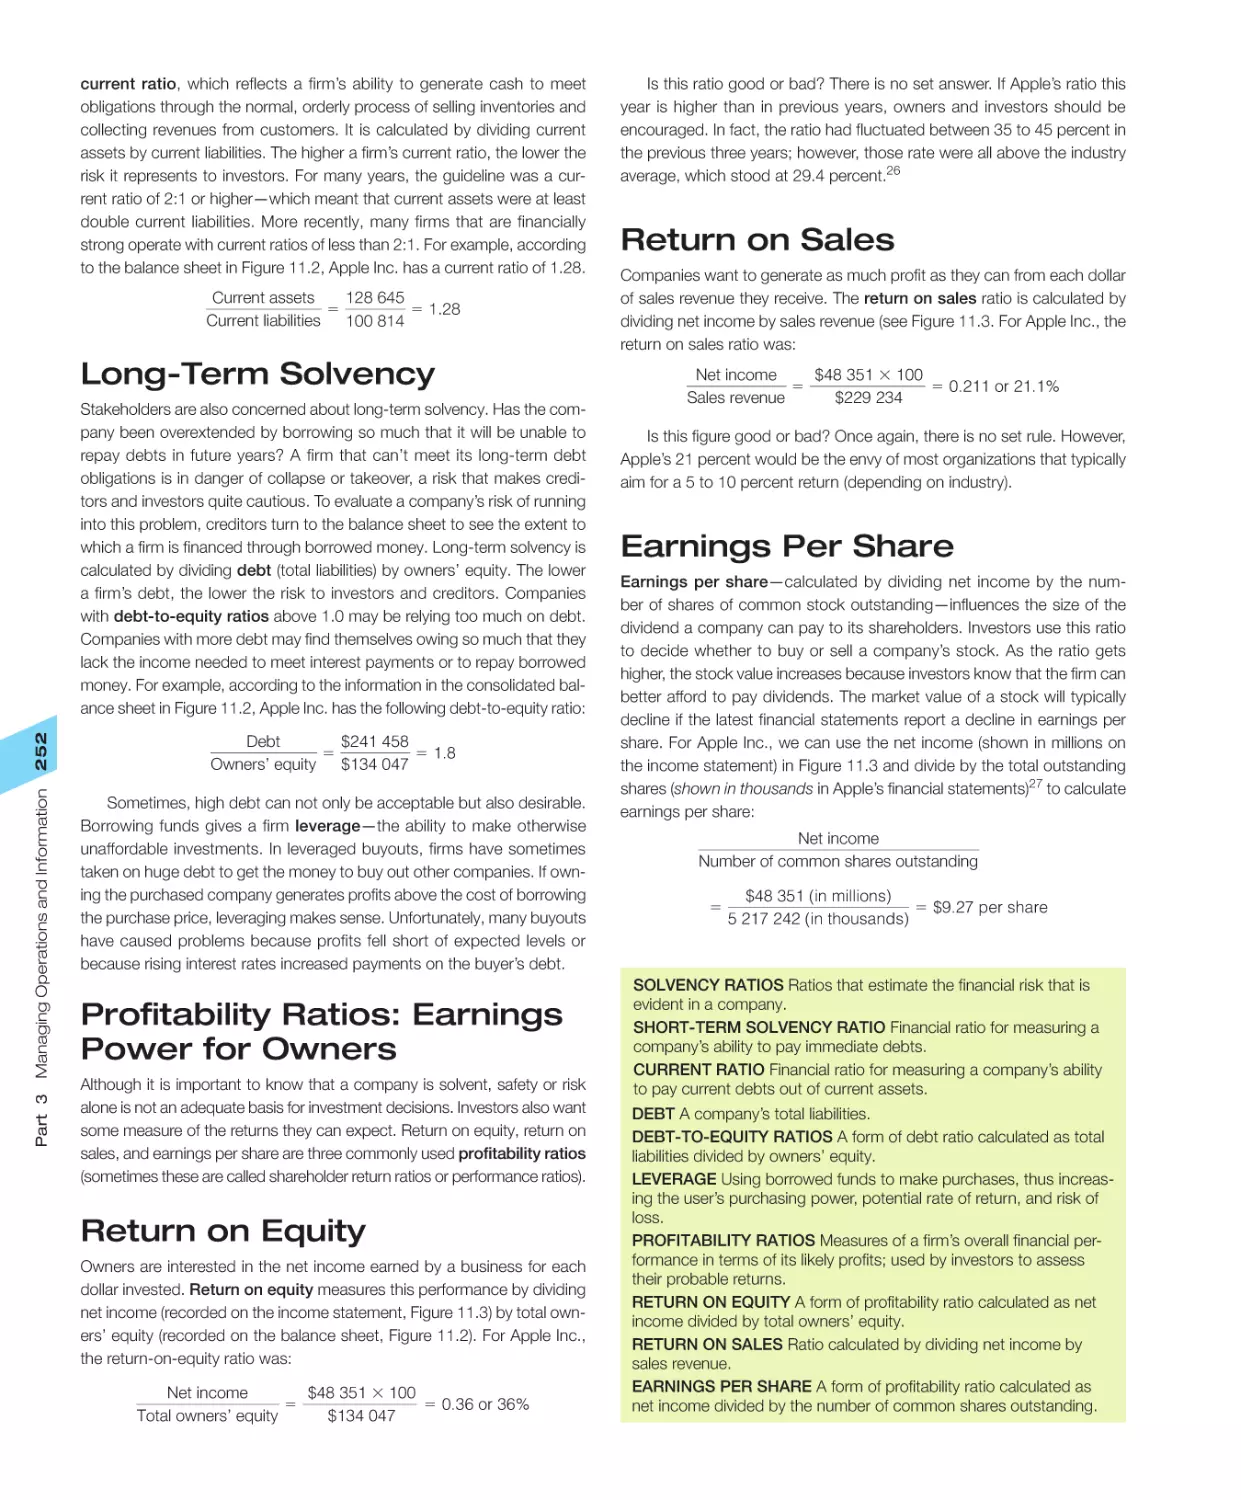 Long‐Term Solvency
Profitability Ratios: Earnings Power for Owners
Return on Equity
Return on Sales
Earnings Per Share